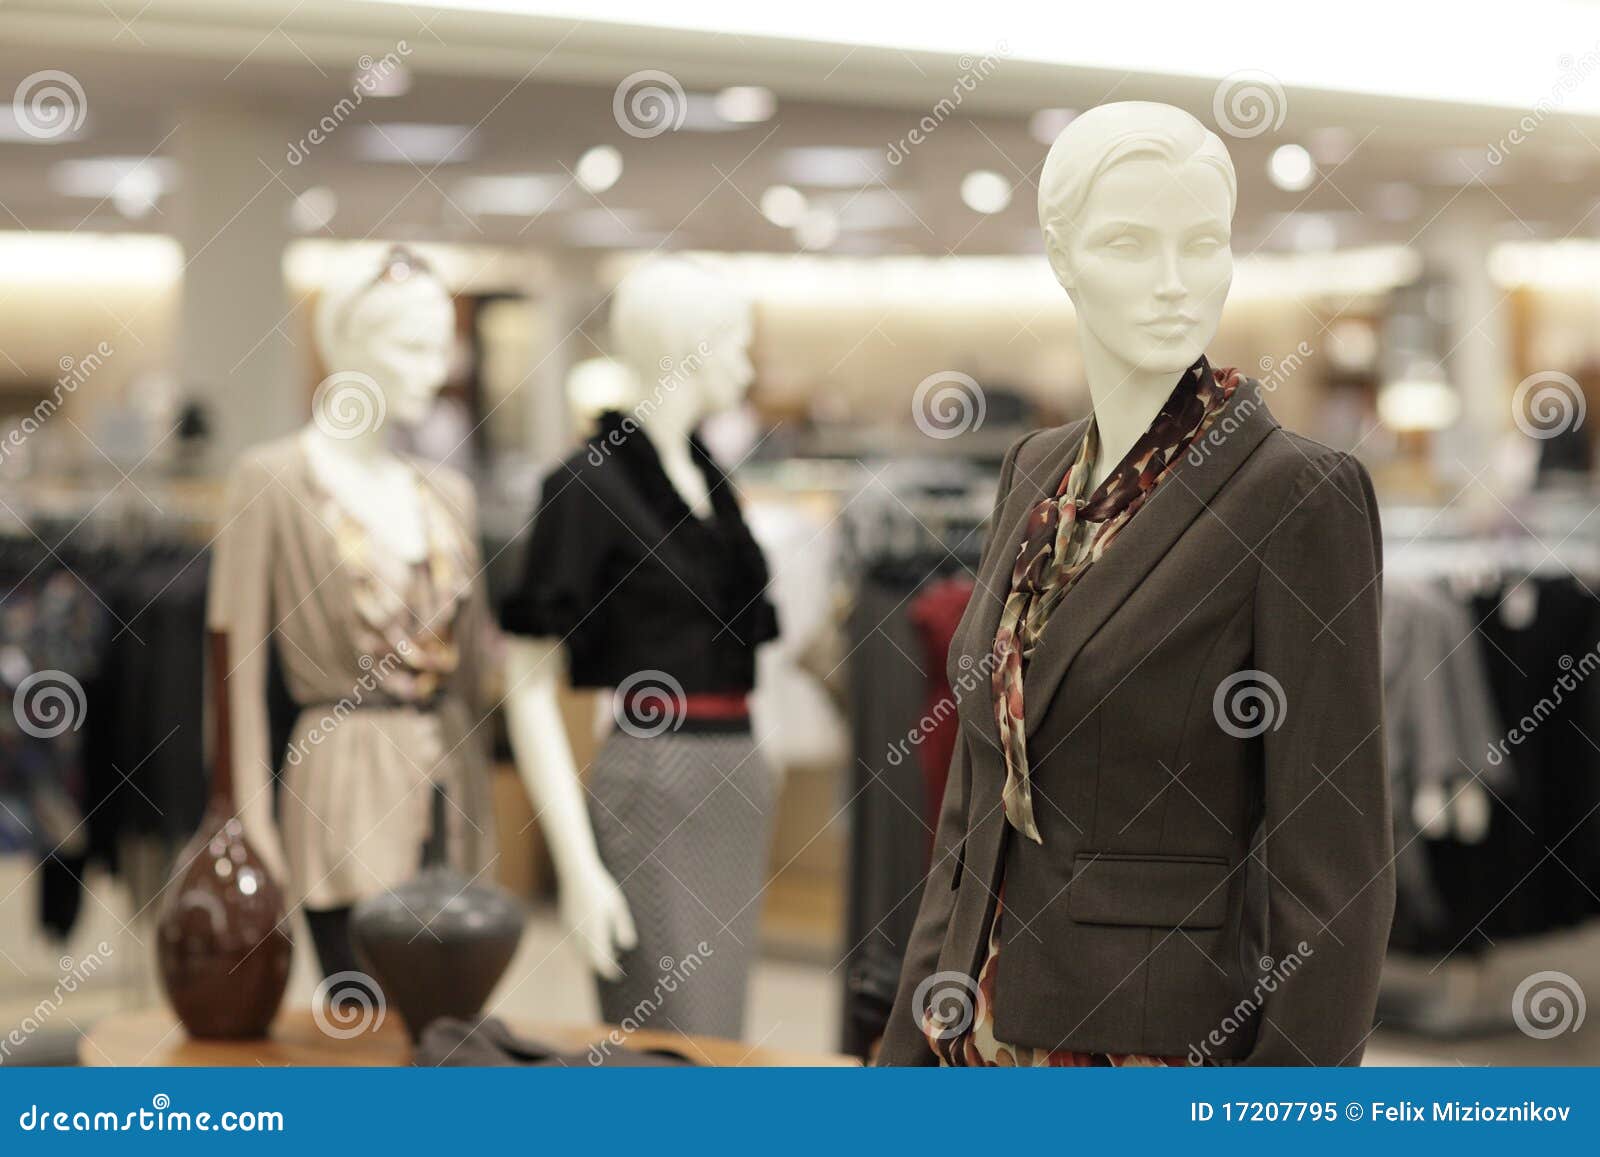 Female mannequin stock image. Image of lady, business - 17207795